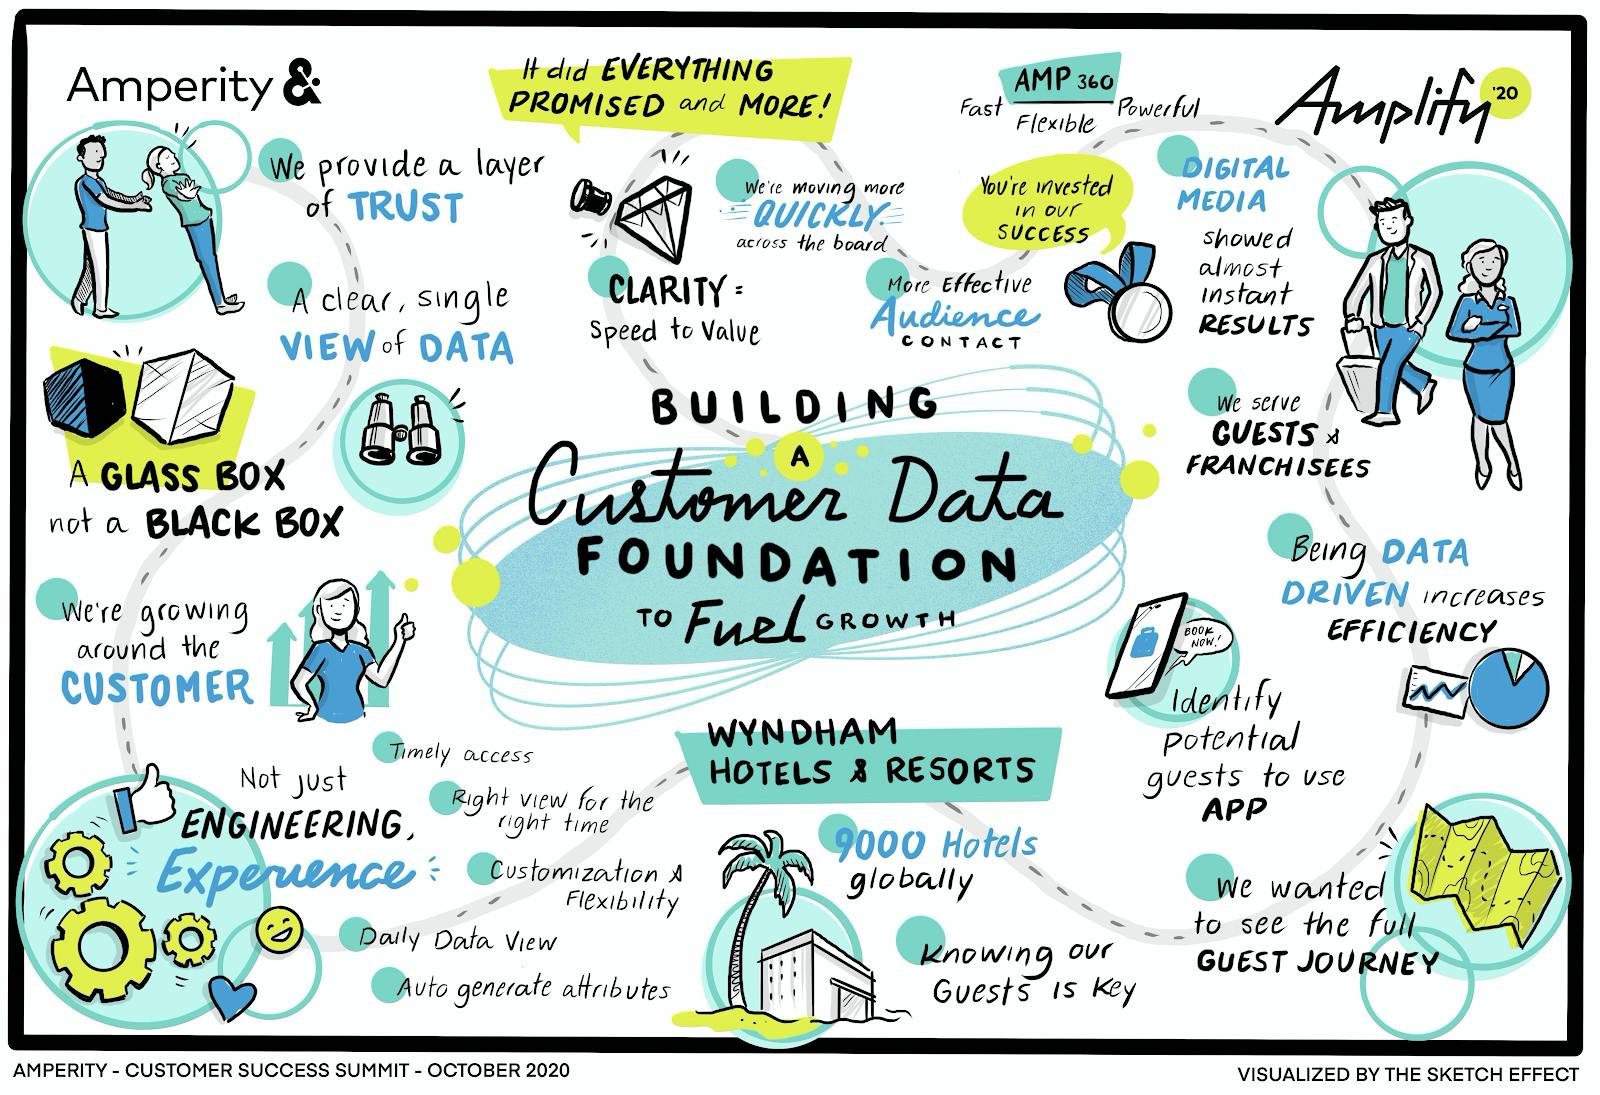 Building a Customer Data Foundation to fuel growth